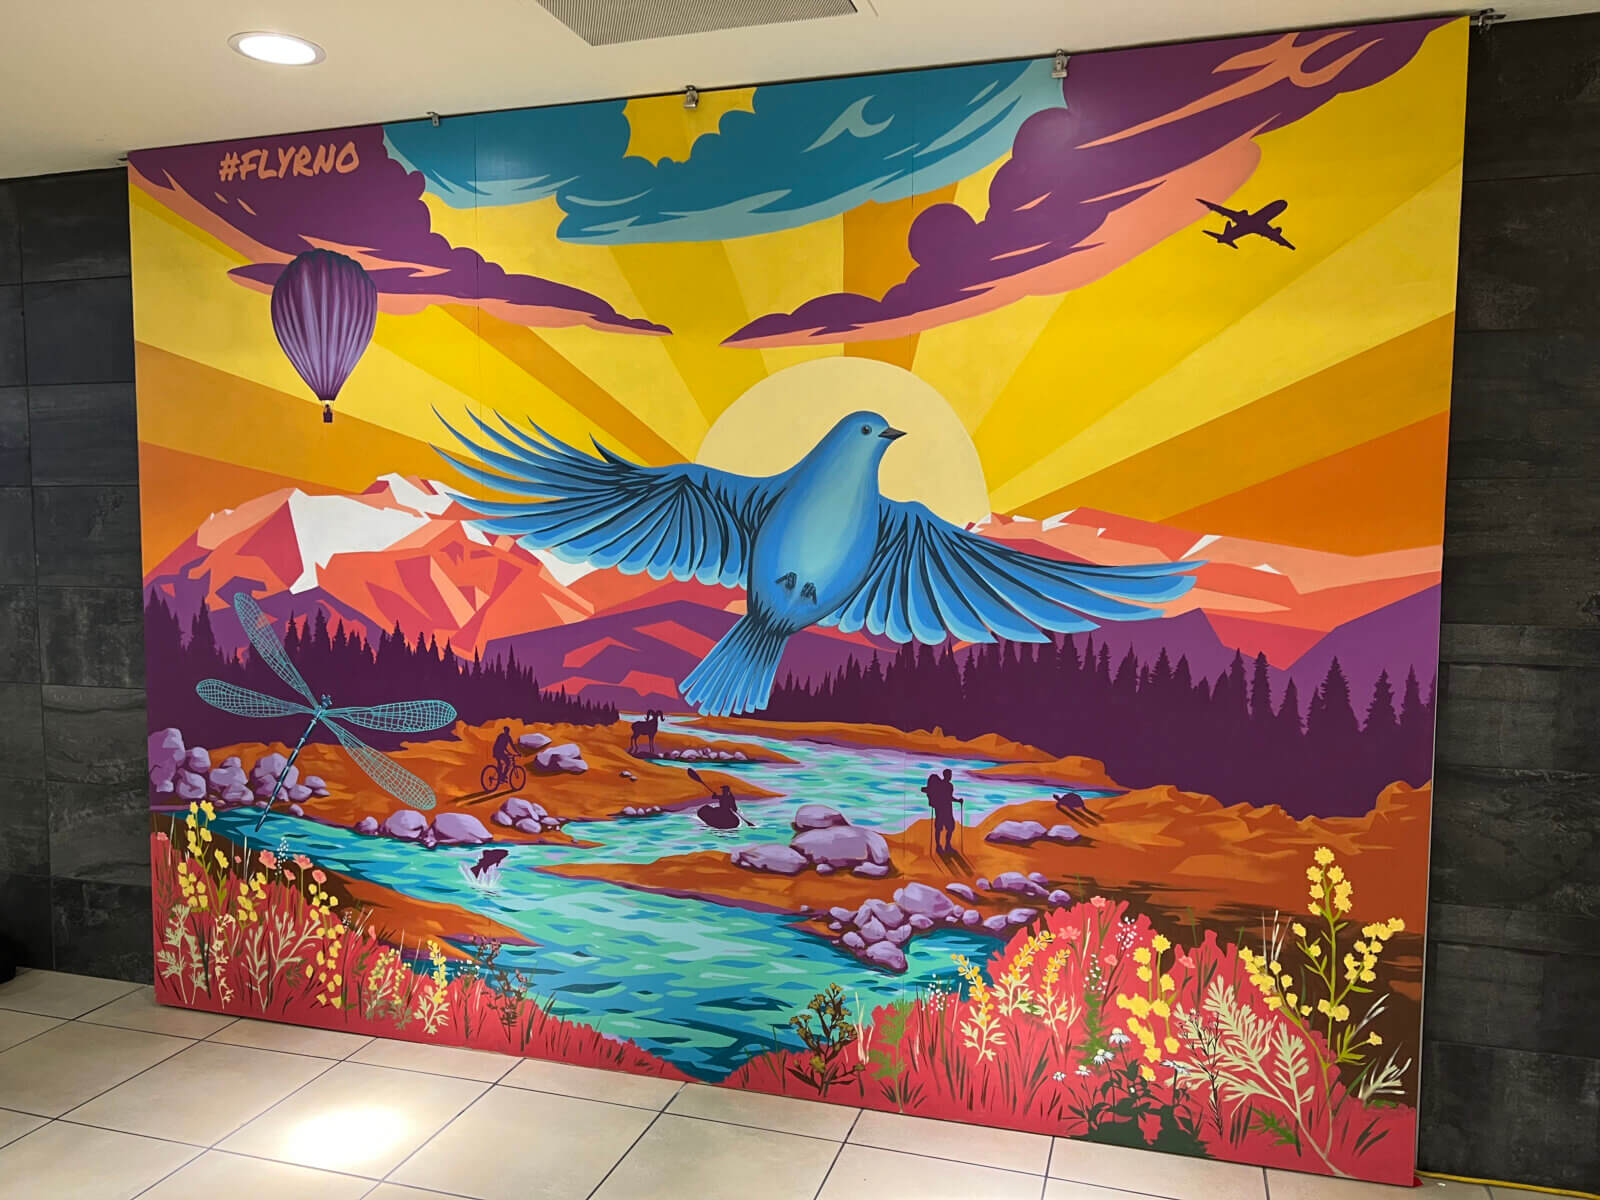 RNO colorful interactive mural depicting Reno-Tahoe area, native wildlife, and people enjoying outdoor activities.